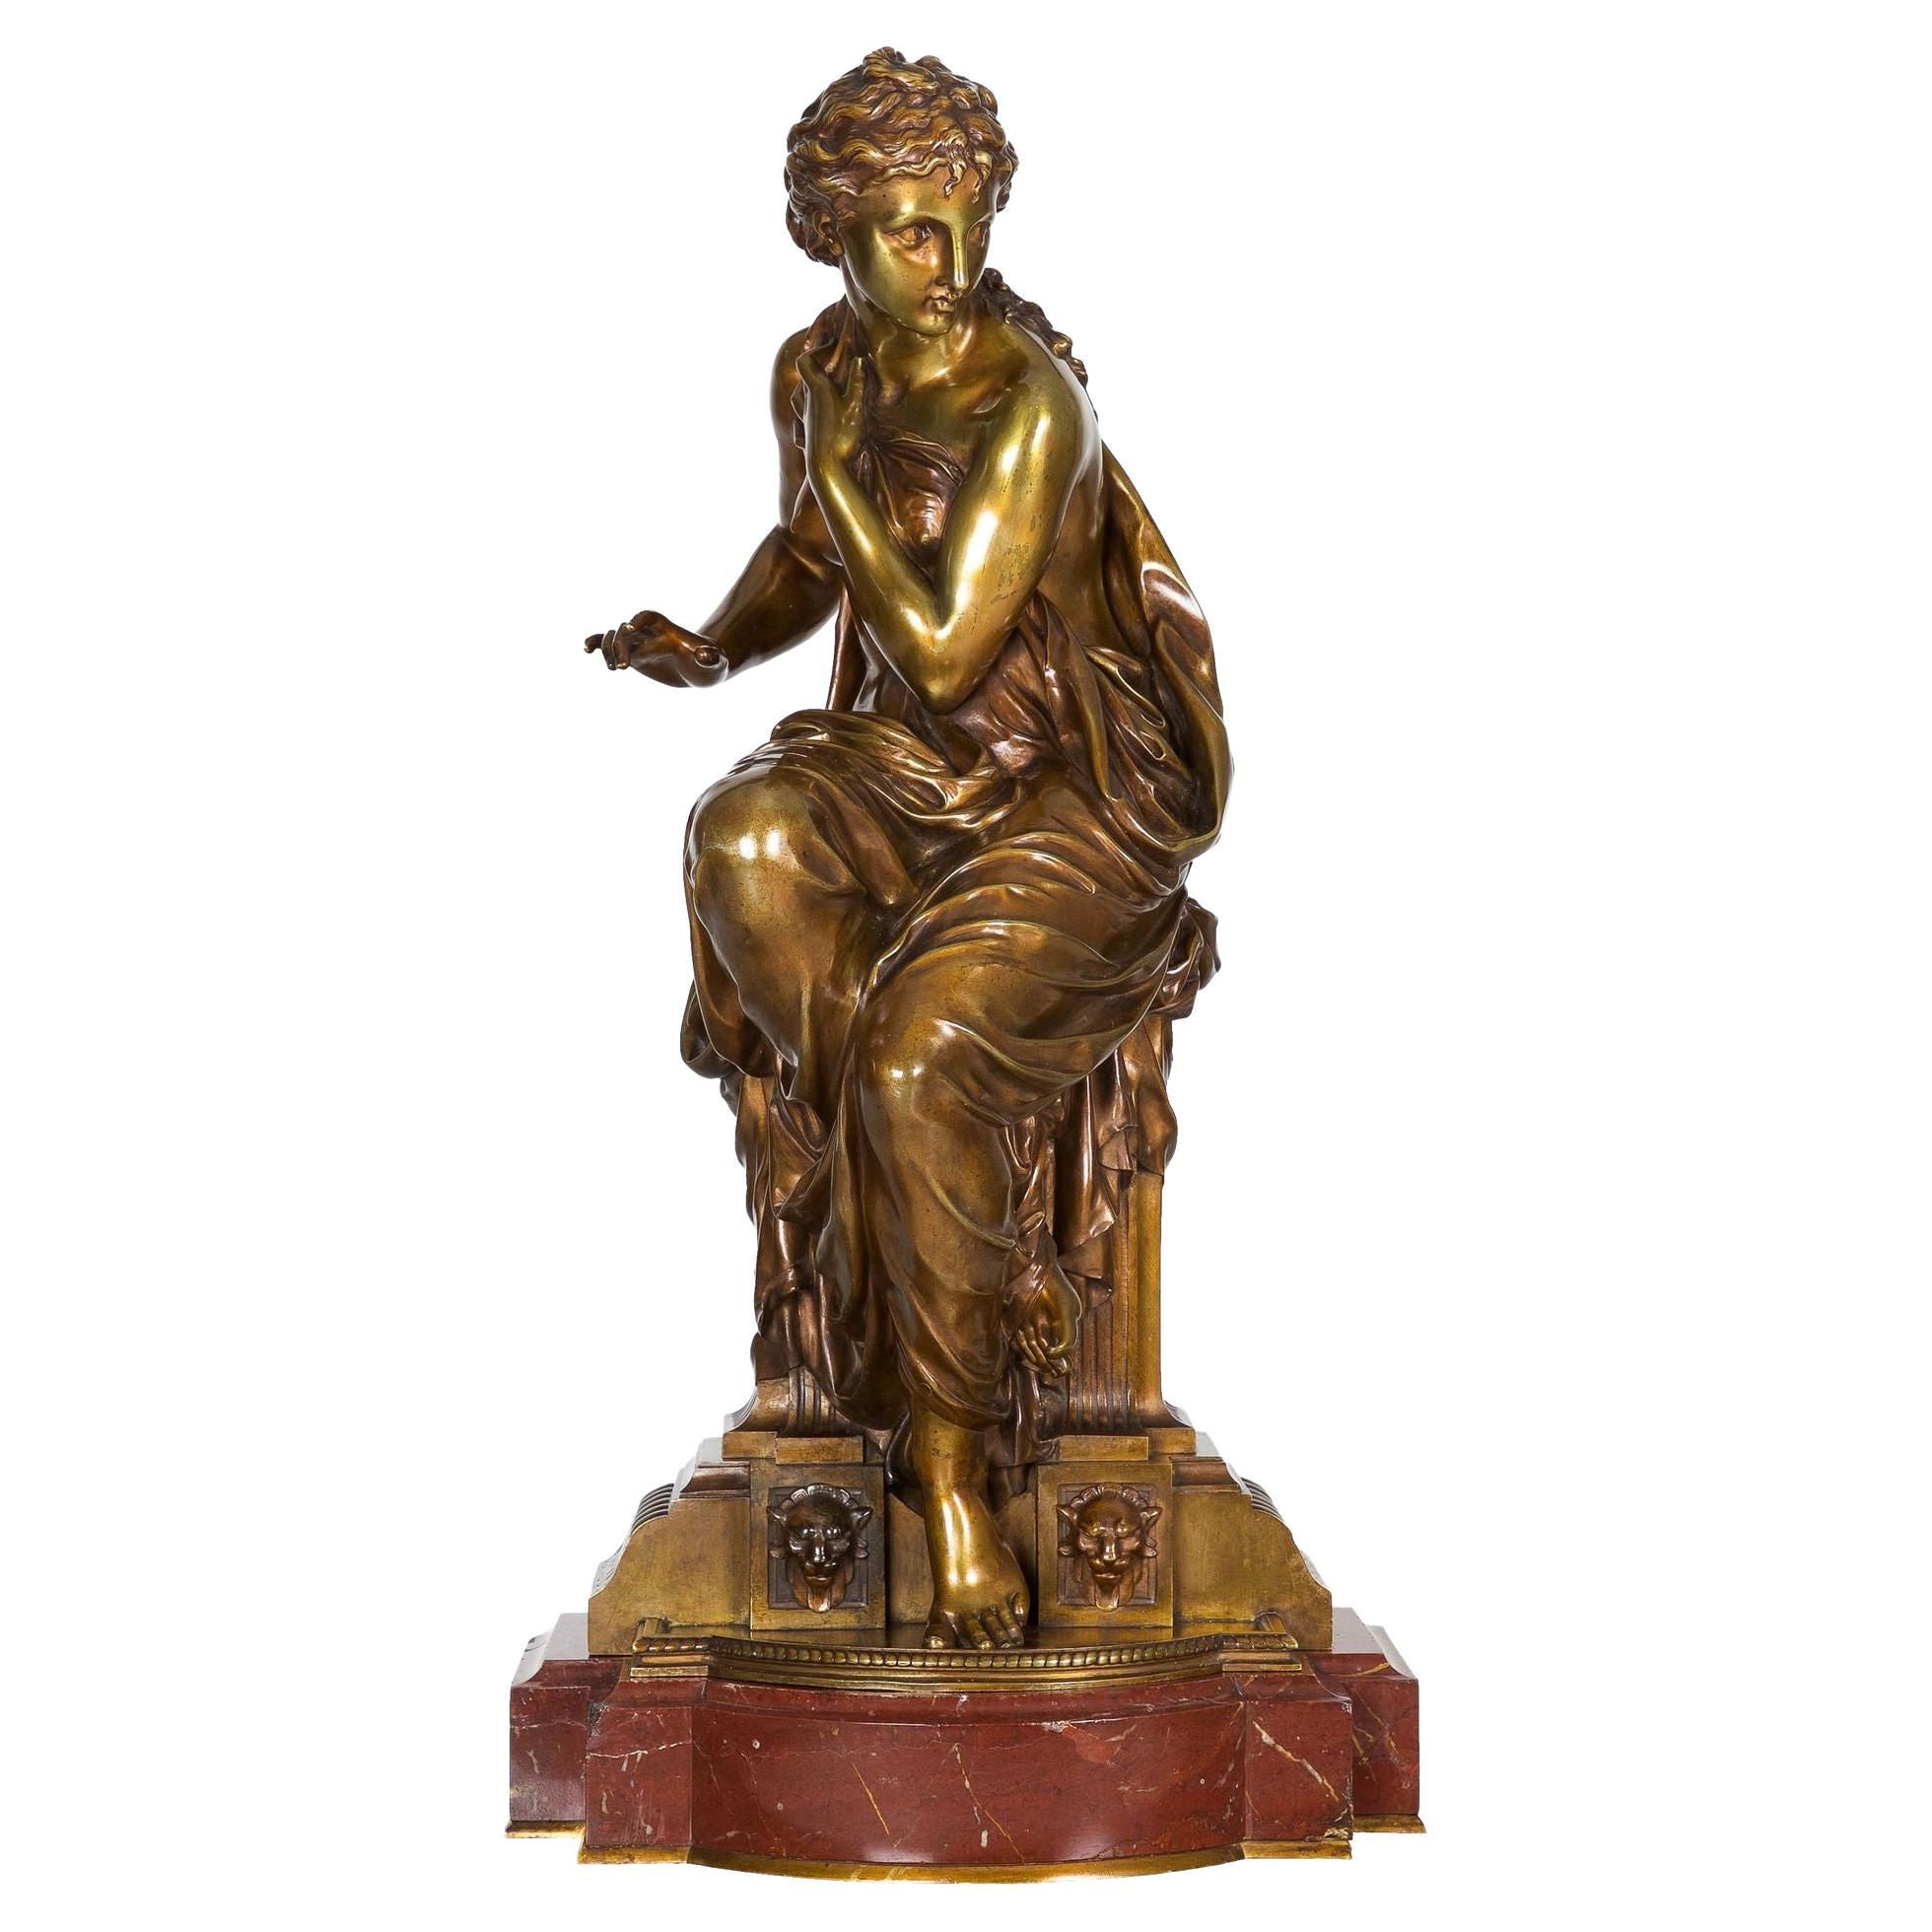 French Antique Bronze Sculpture “Seated Woman” by Etienne-Henri Dumaige, c.1880